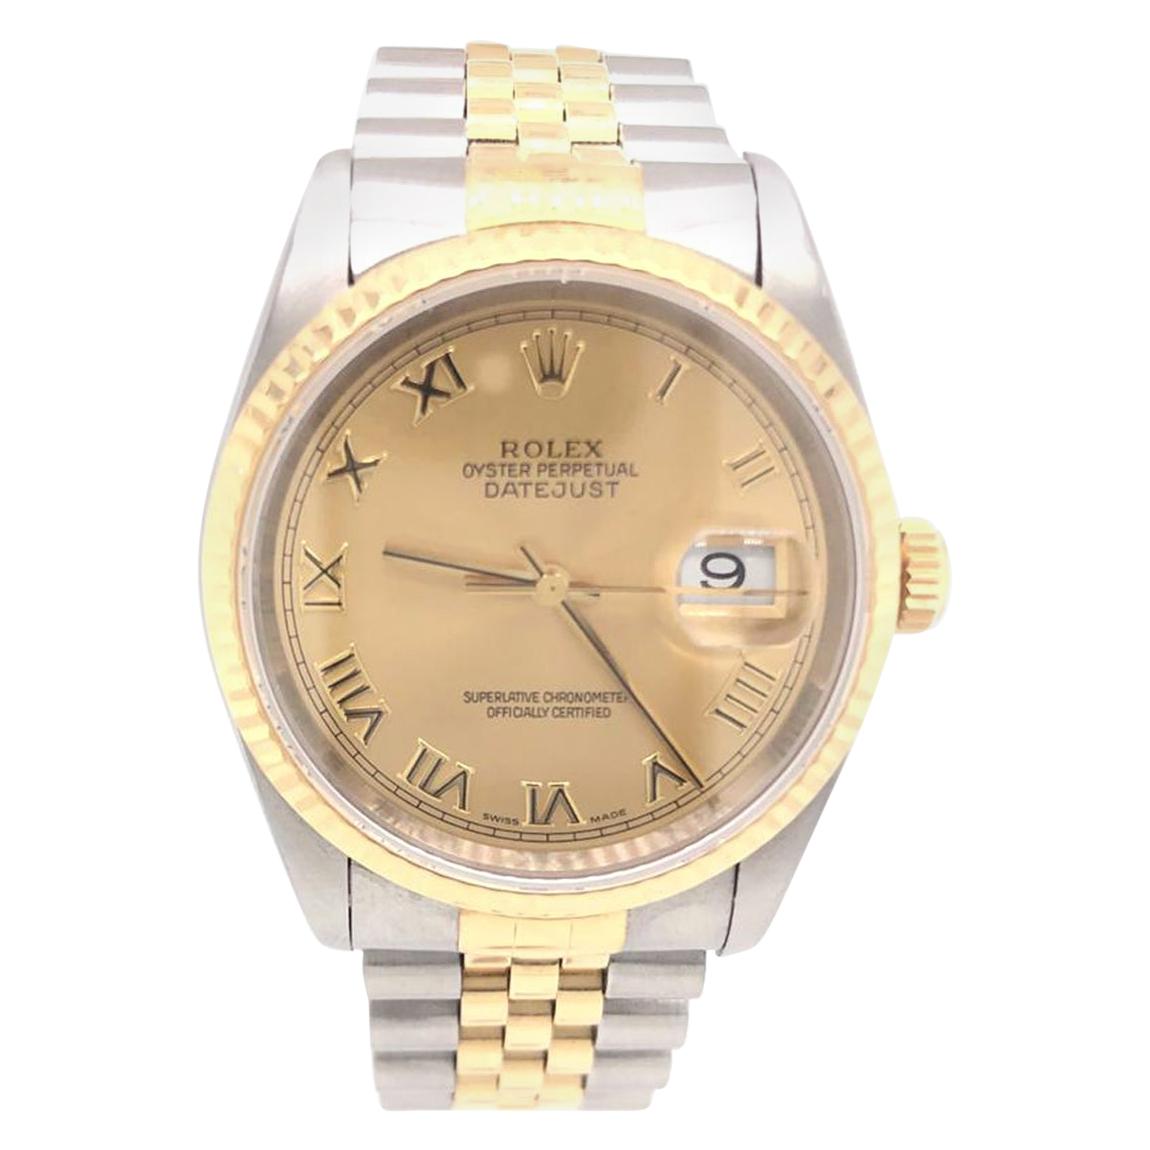 Rolex Datejust 1996 Men's Two-Tone Champagne Dial 18 Karat Gold and Steel Watch